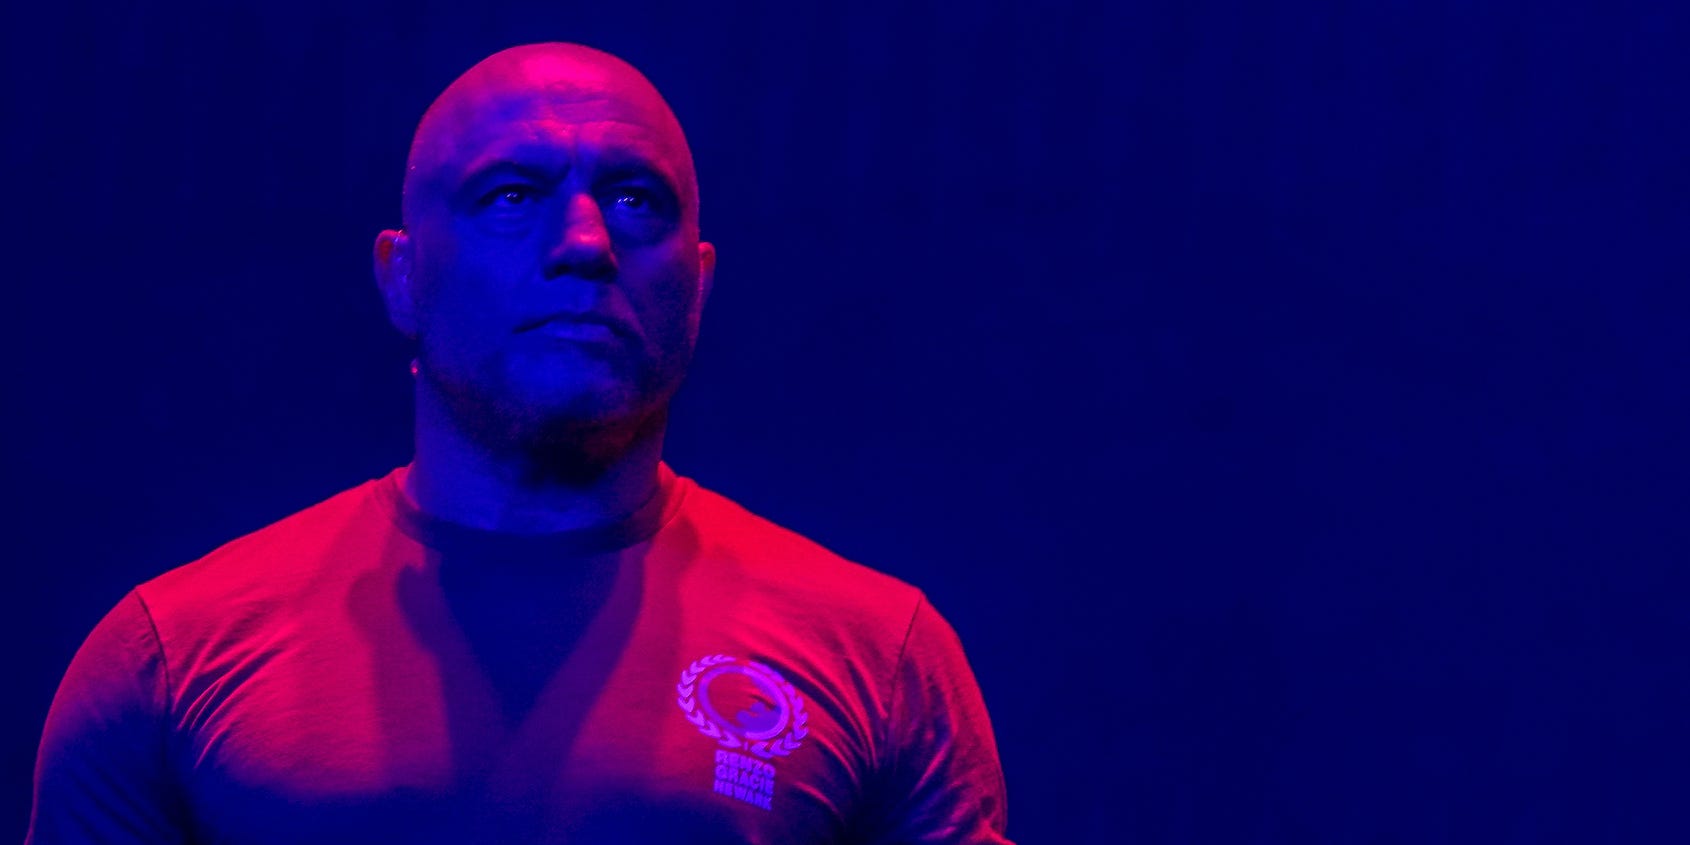 Drenched in a mix of red and purple light, Joe Rogan stands expressionless.